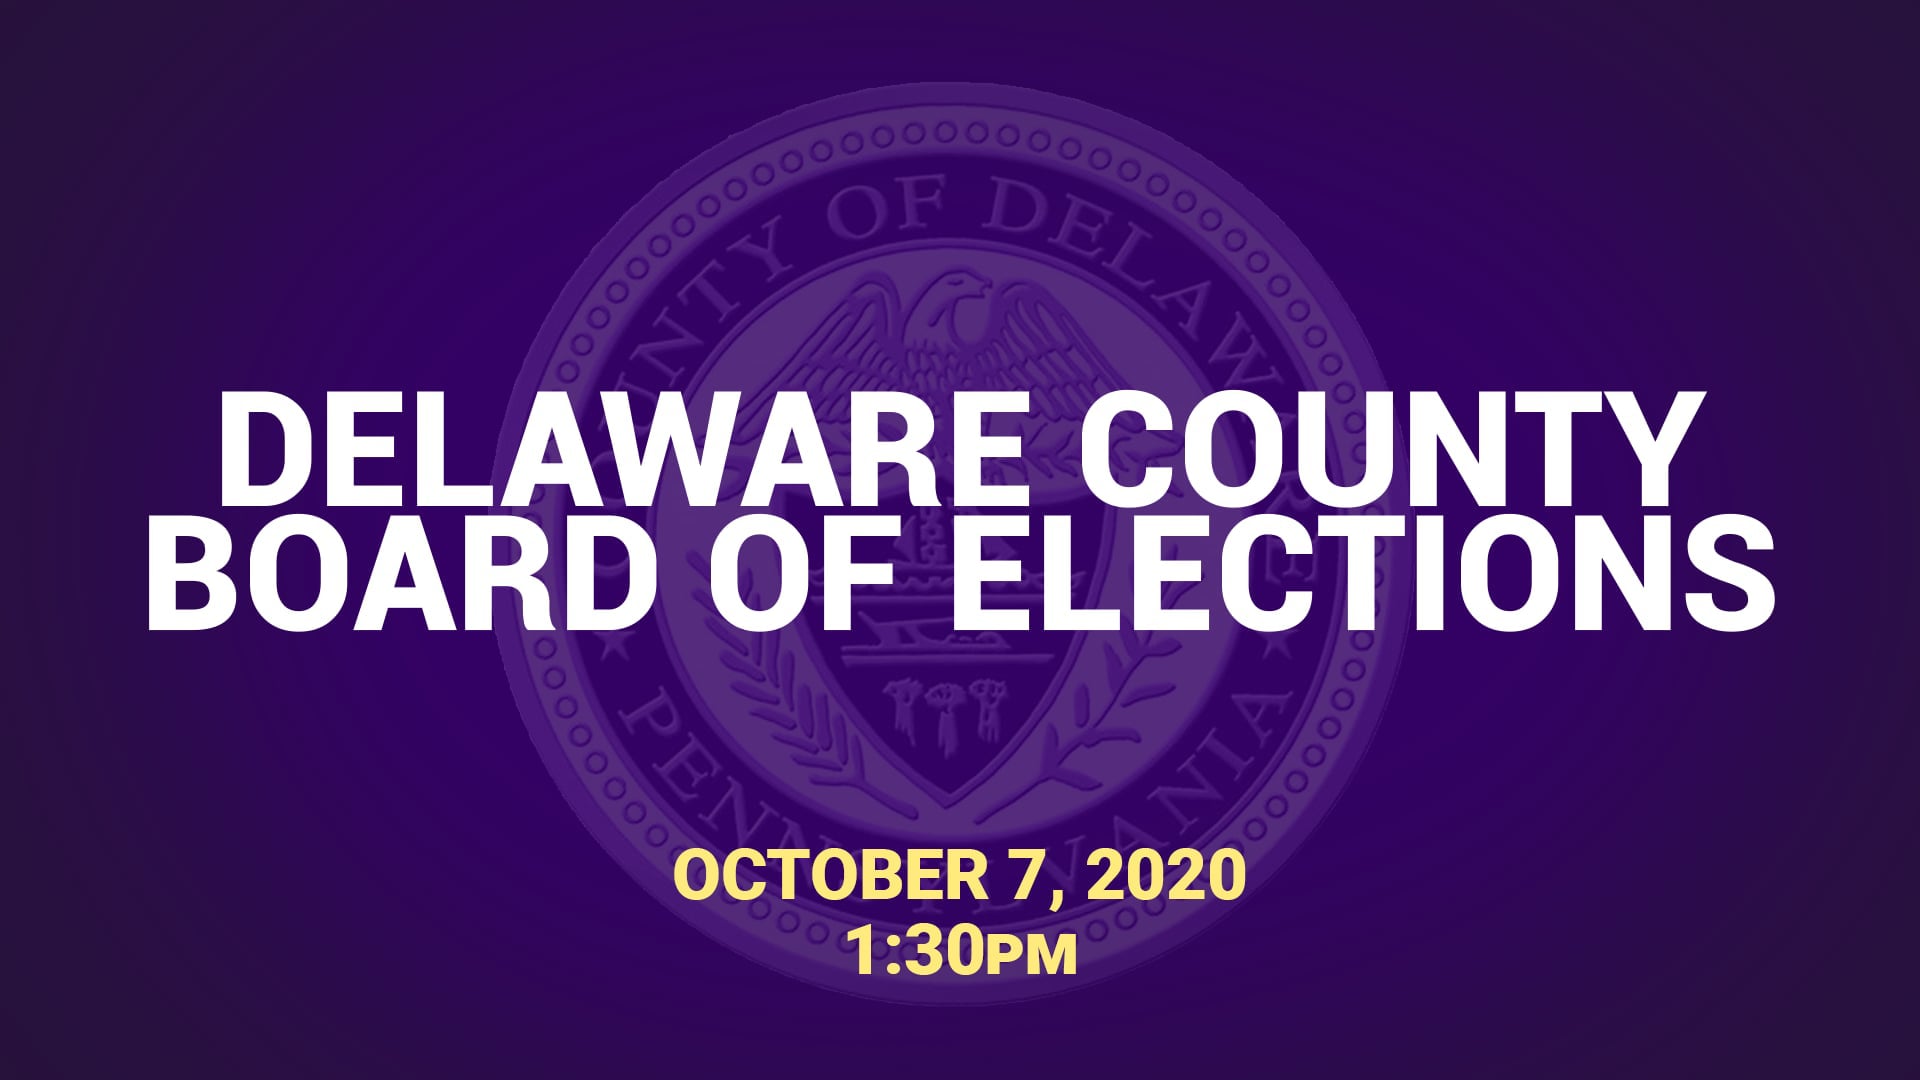 October 7, 2020 Delaware County Board of Elections